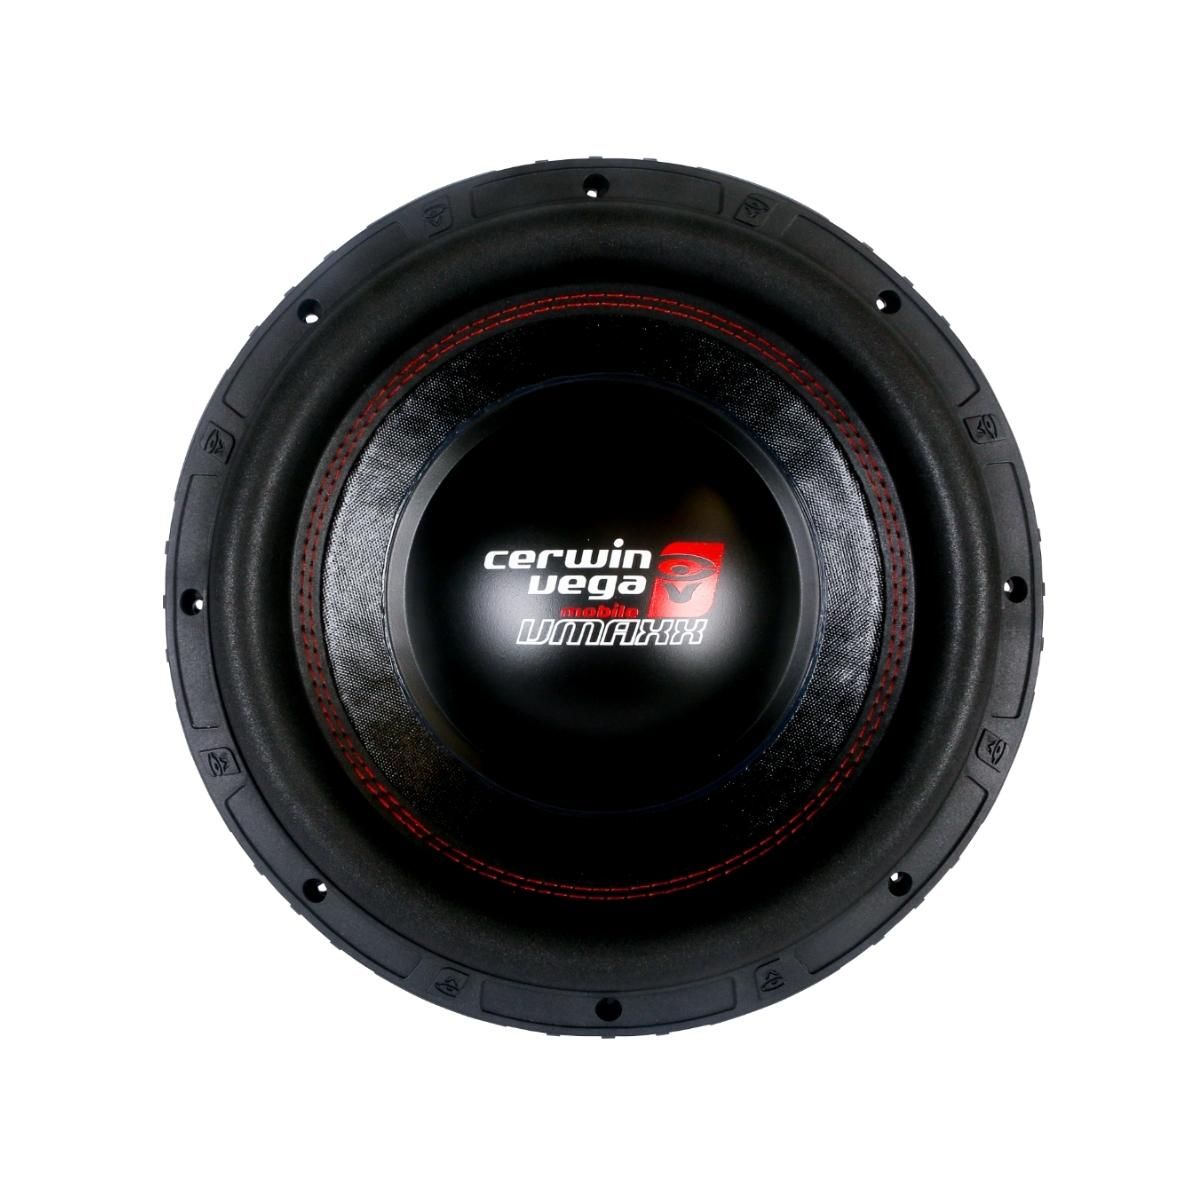 accumulate be quiet take down VMAX12D2 - 12” Dual 2 Ohm High-Performance Subwoofer 1000W RMS / 2000W MAX  - Cerwin Vega